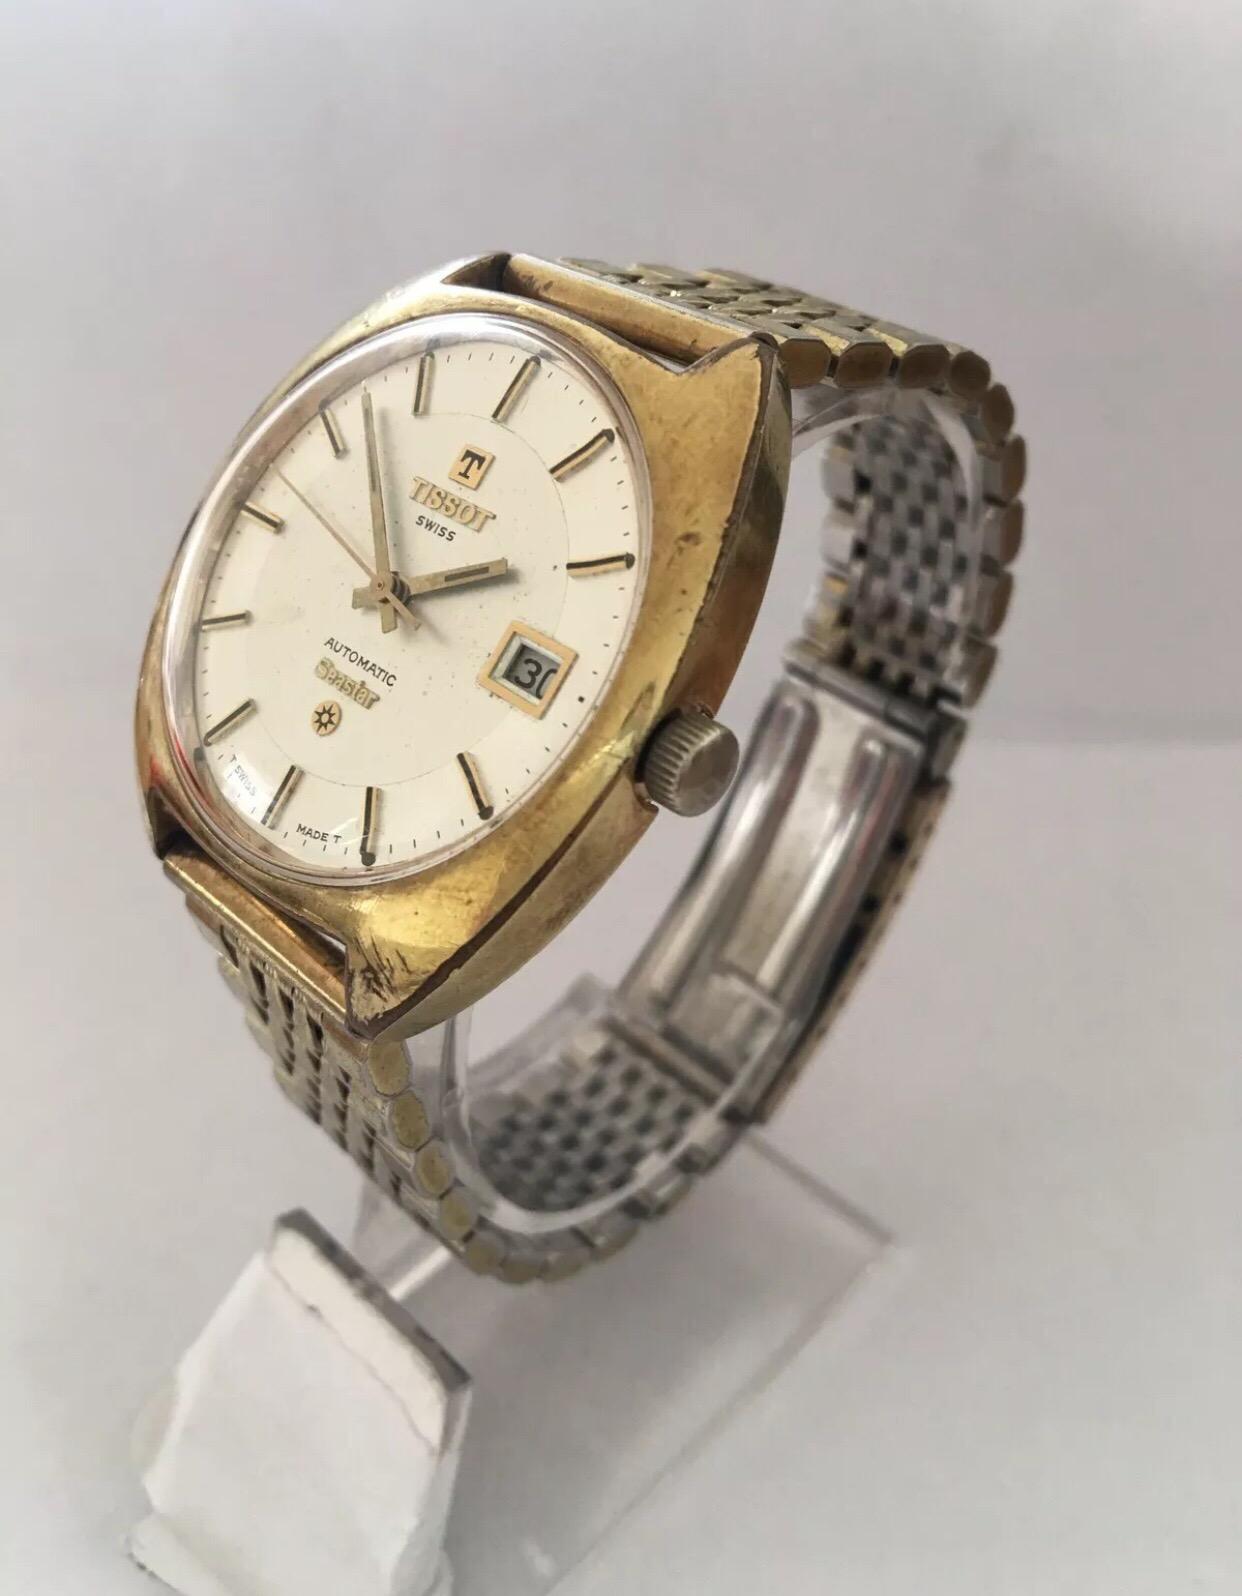 1970’s Vintage Gold Plated Tissot Automatic Seastar

This beautiful vintage self winding (automatic) watch is working and running well. Visible signs of ageing and wear with small and light surface marks on the glass and on the watch case as shown.